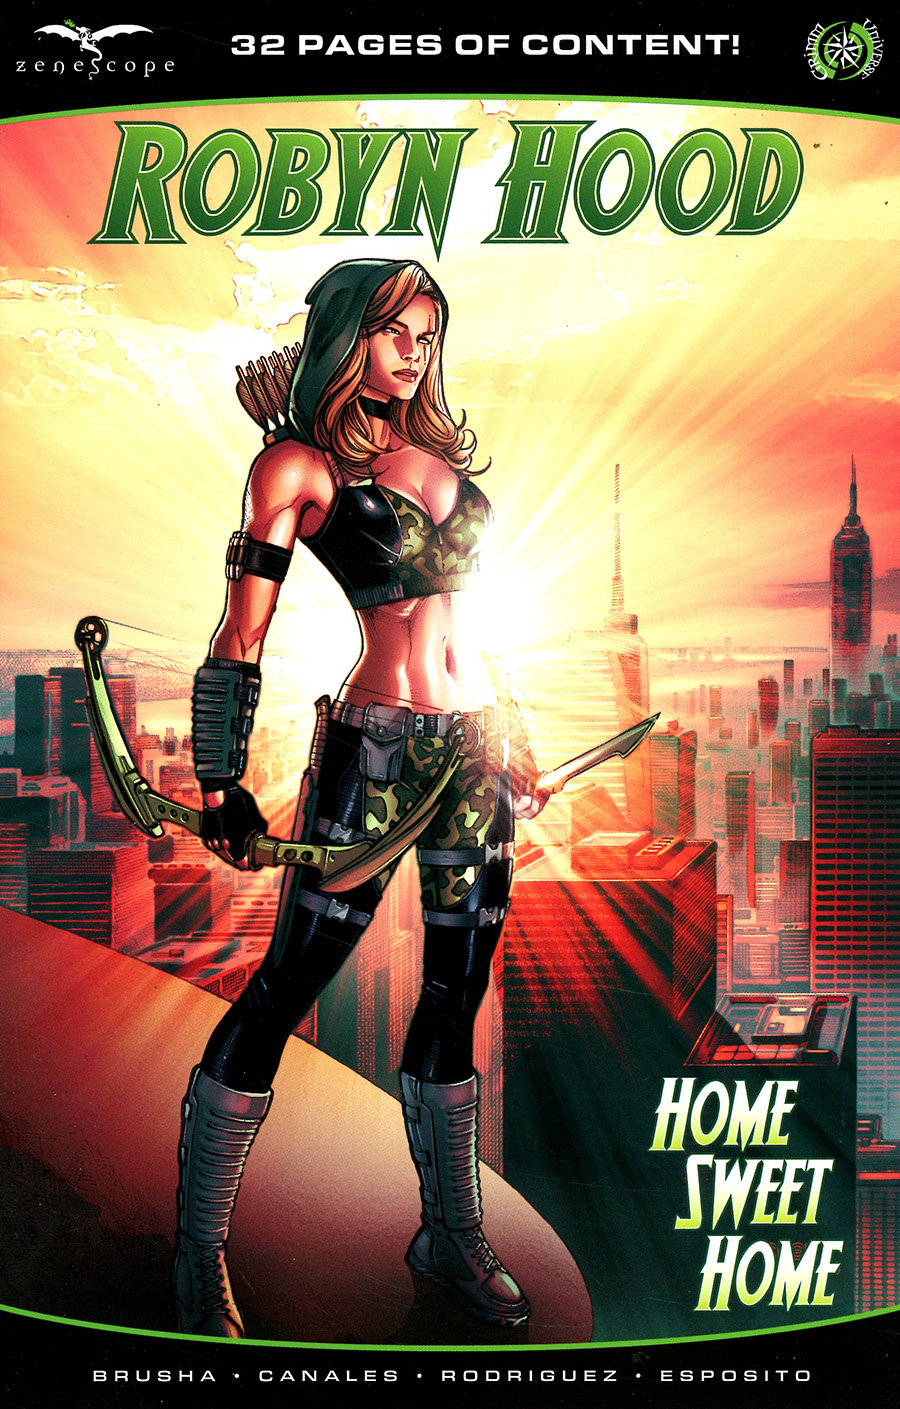 Grimm Fairy Tales Presents Robyn Hood Home Sweet Home #1 (One Shot) Cover A Sean Chen